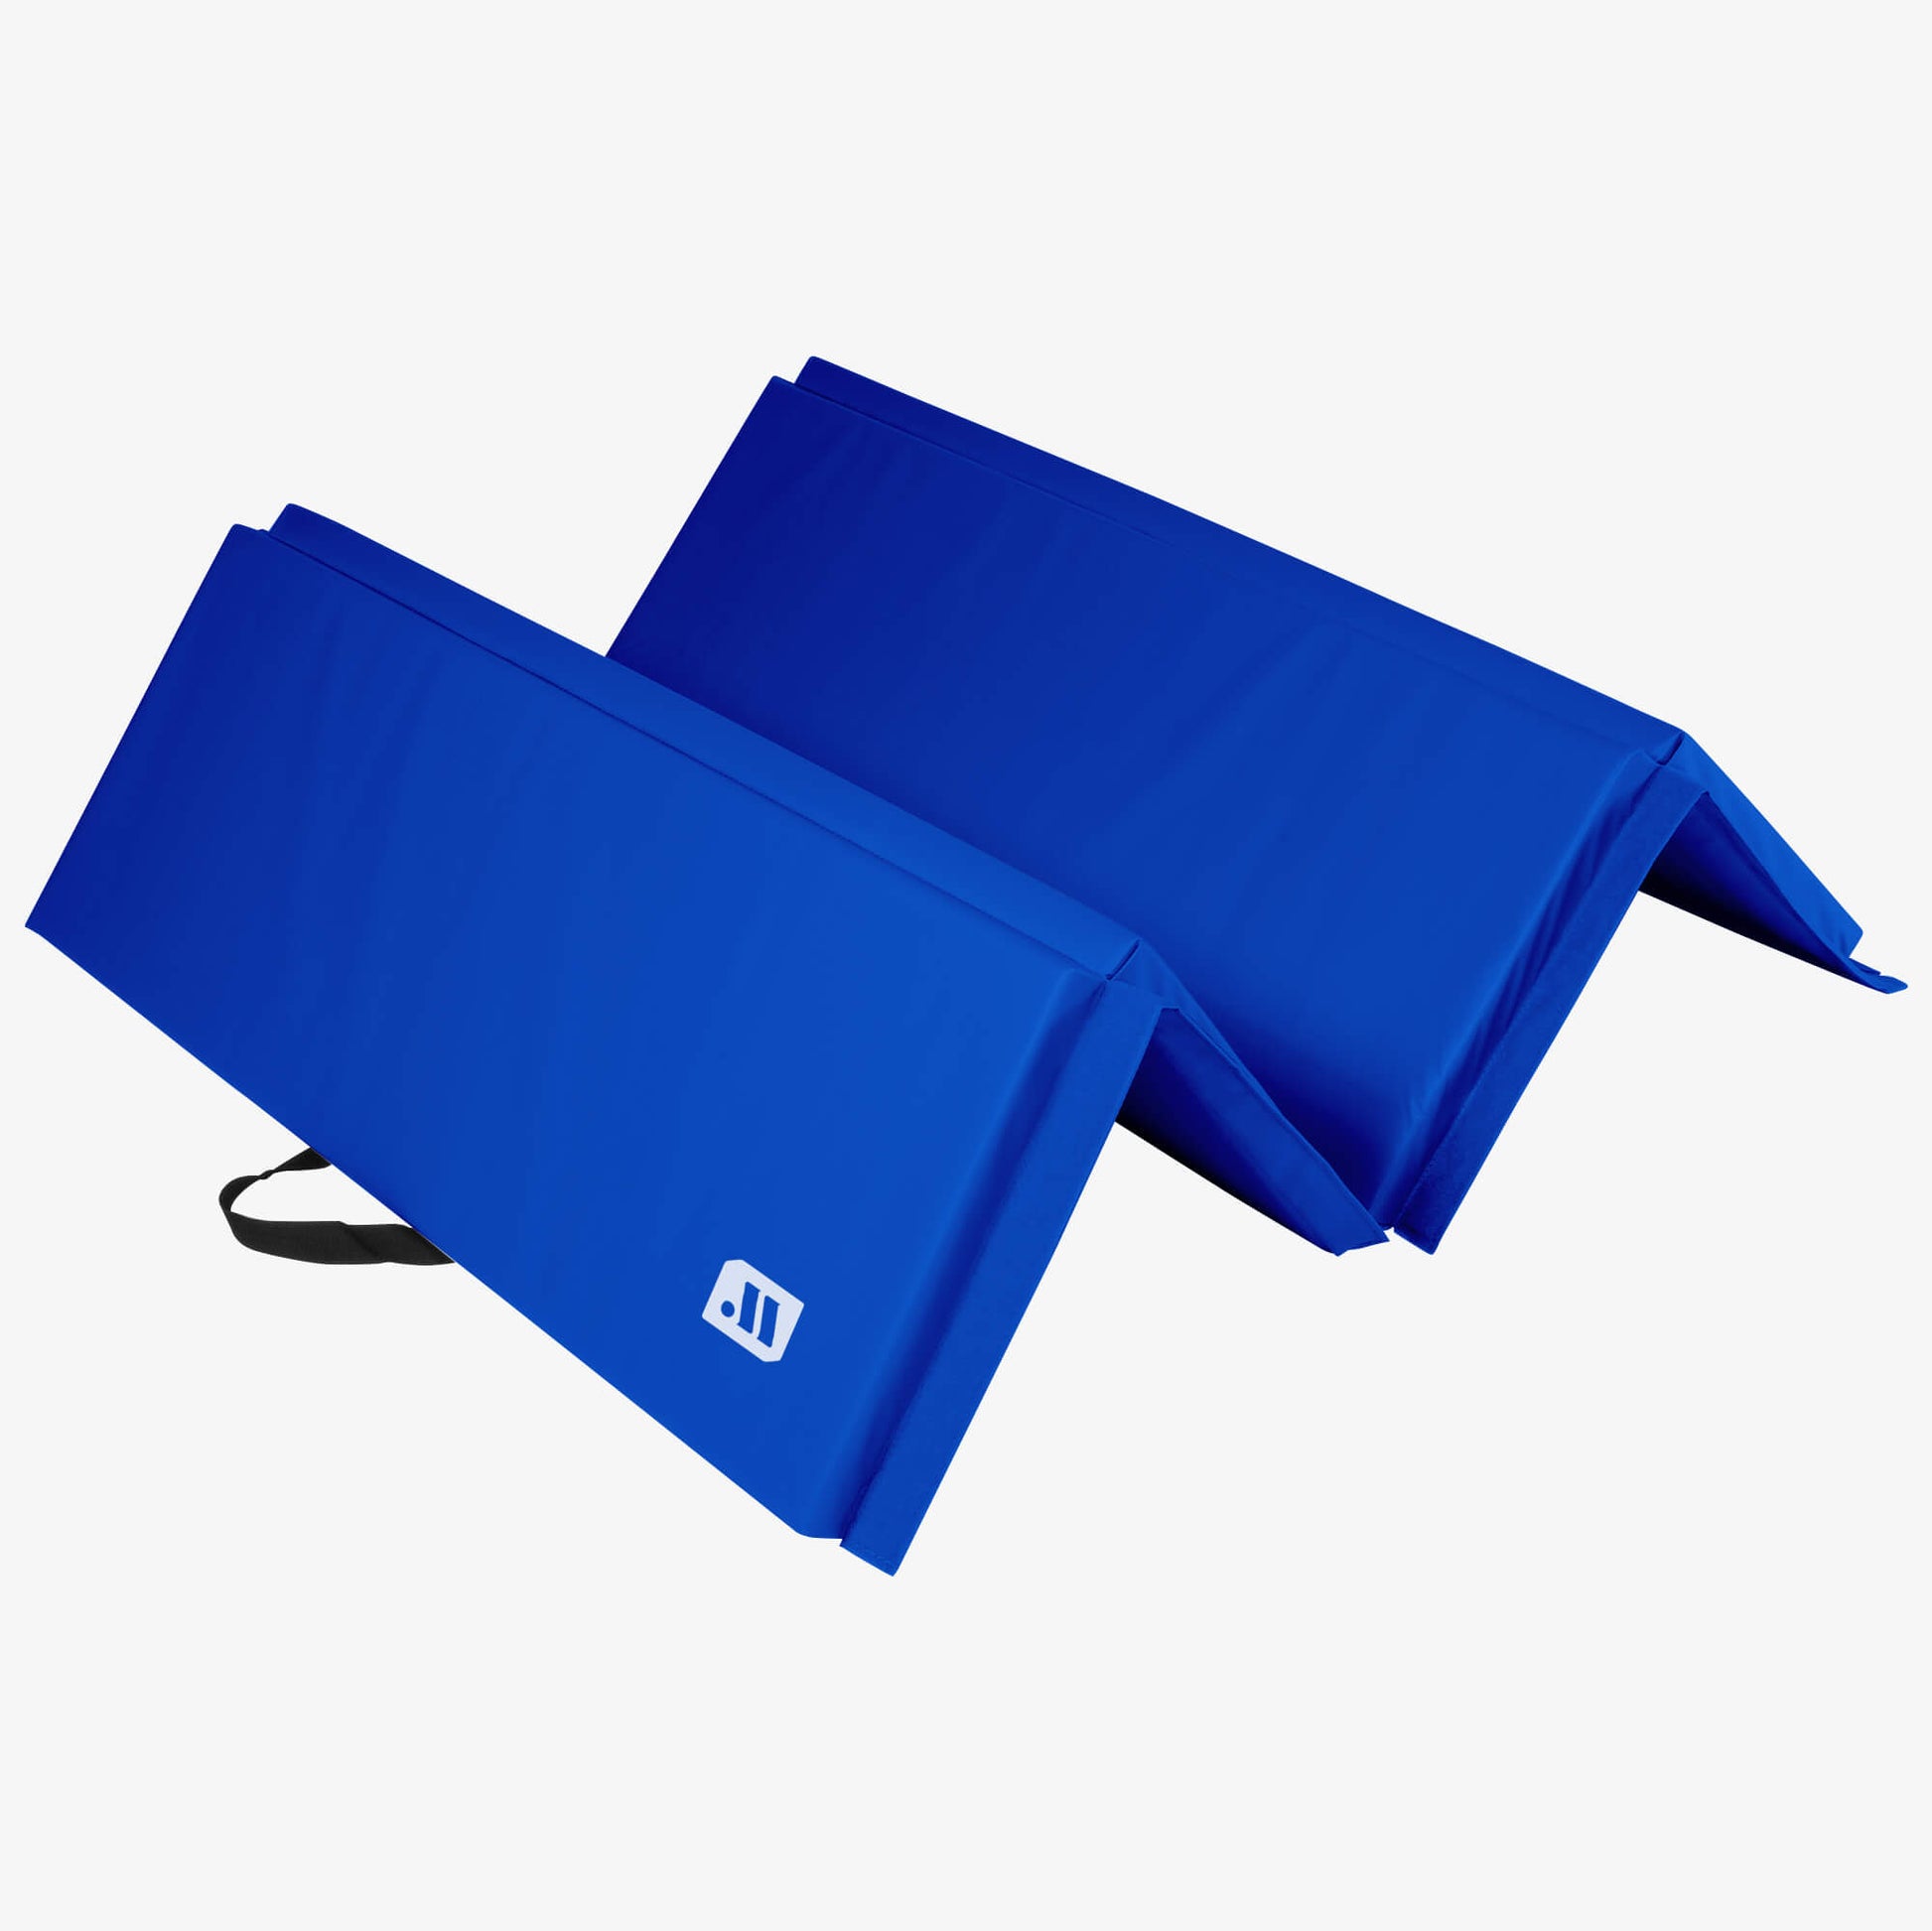 We Sell Mats 4 ft x 6 ft x 2 in Personal Fitness & Exercise Mat,  Lightweight and Folds for Carrying Blue